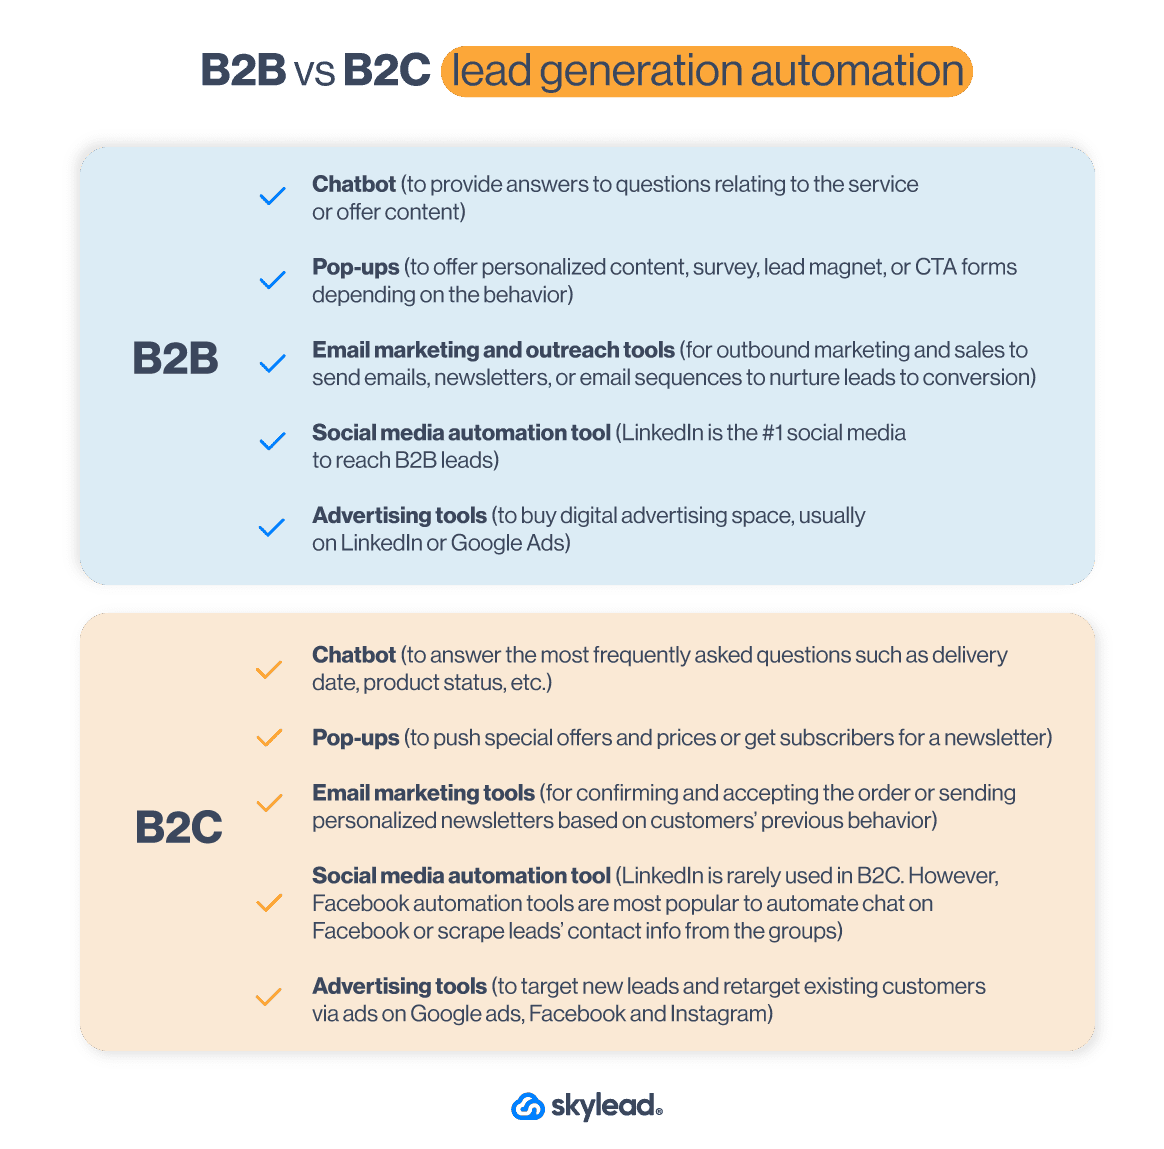 Image that shows difference between automated B2B and B2C lead generation